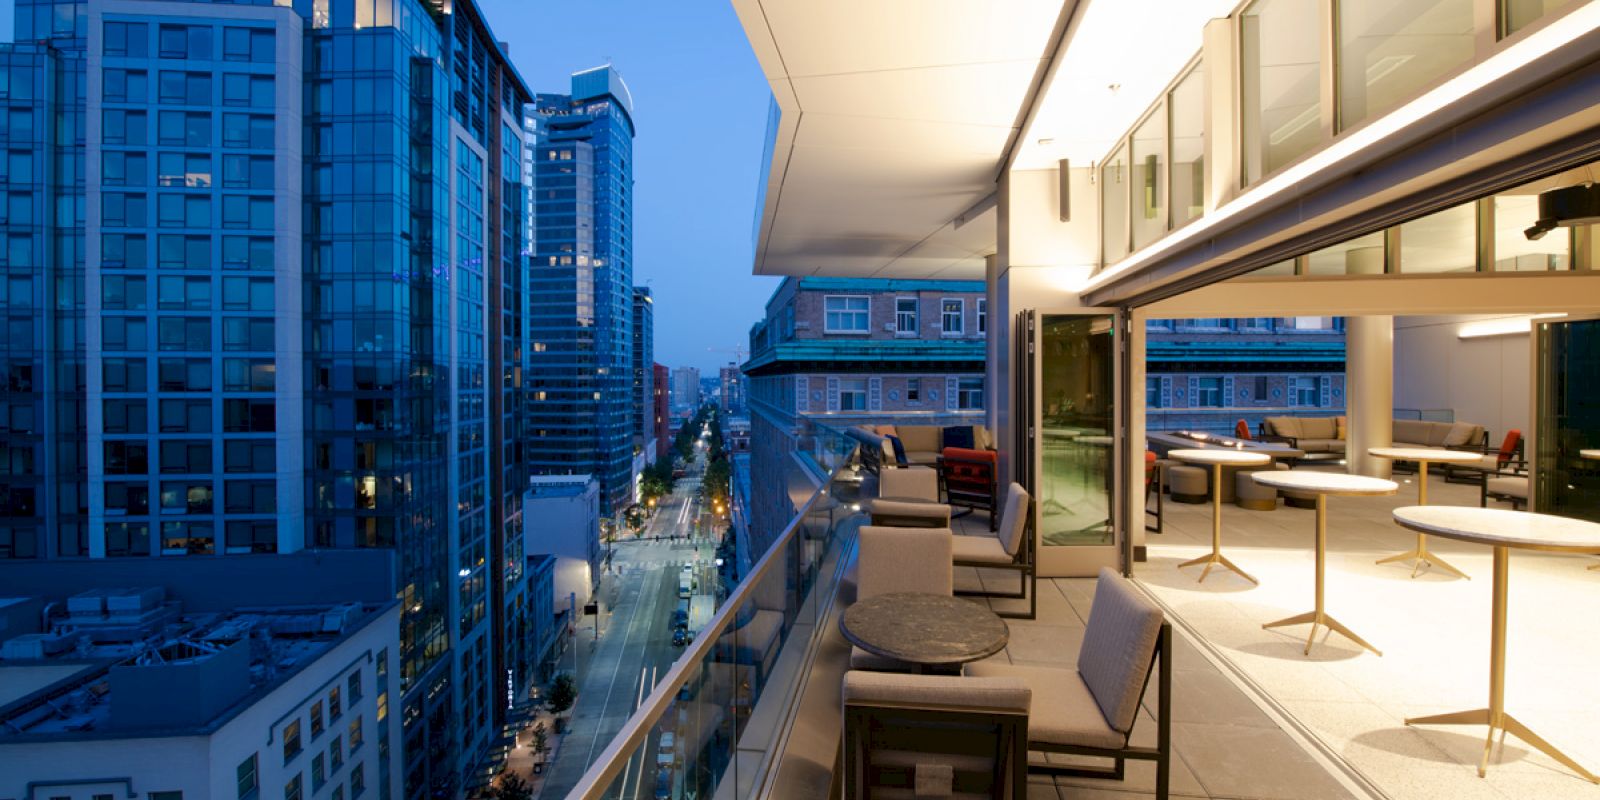 An elegant rooftop balcony with tables and chairs overlooks a cityscape with modern high-rise buildings during dusk.